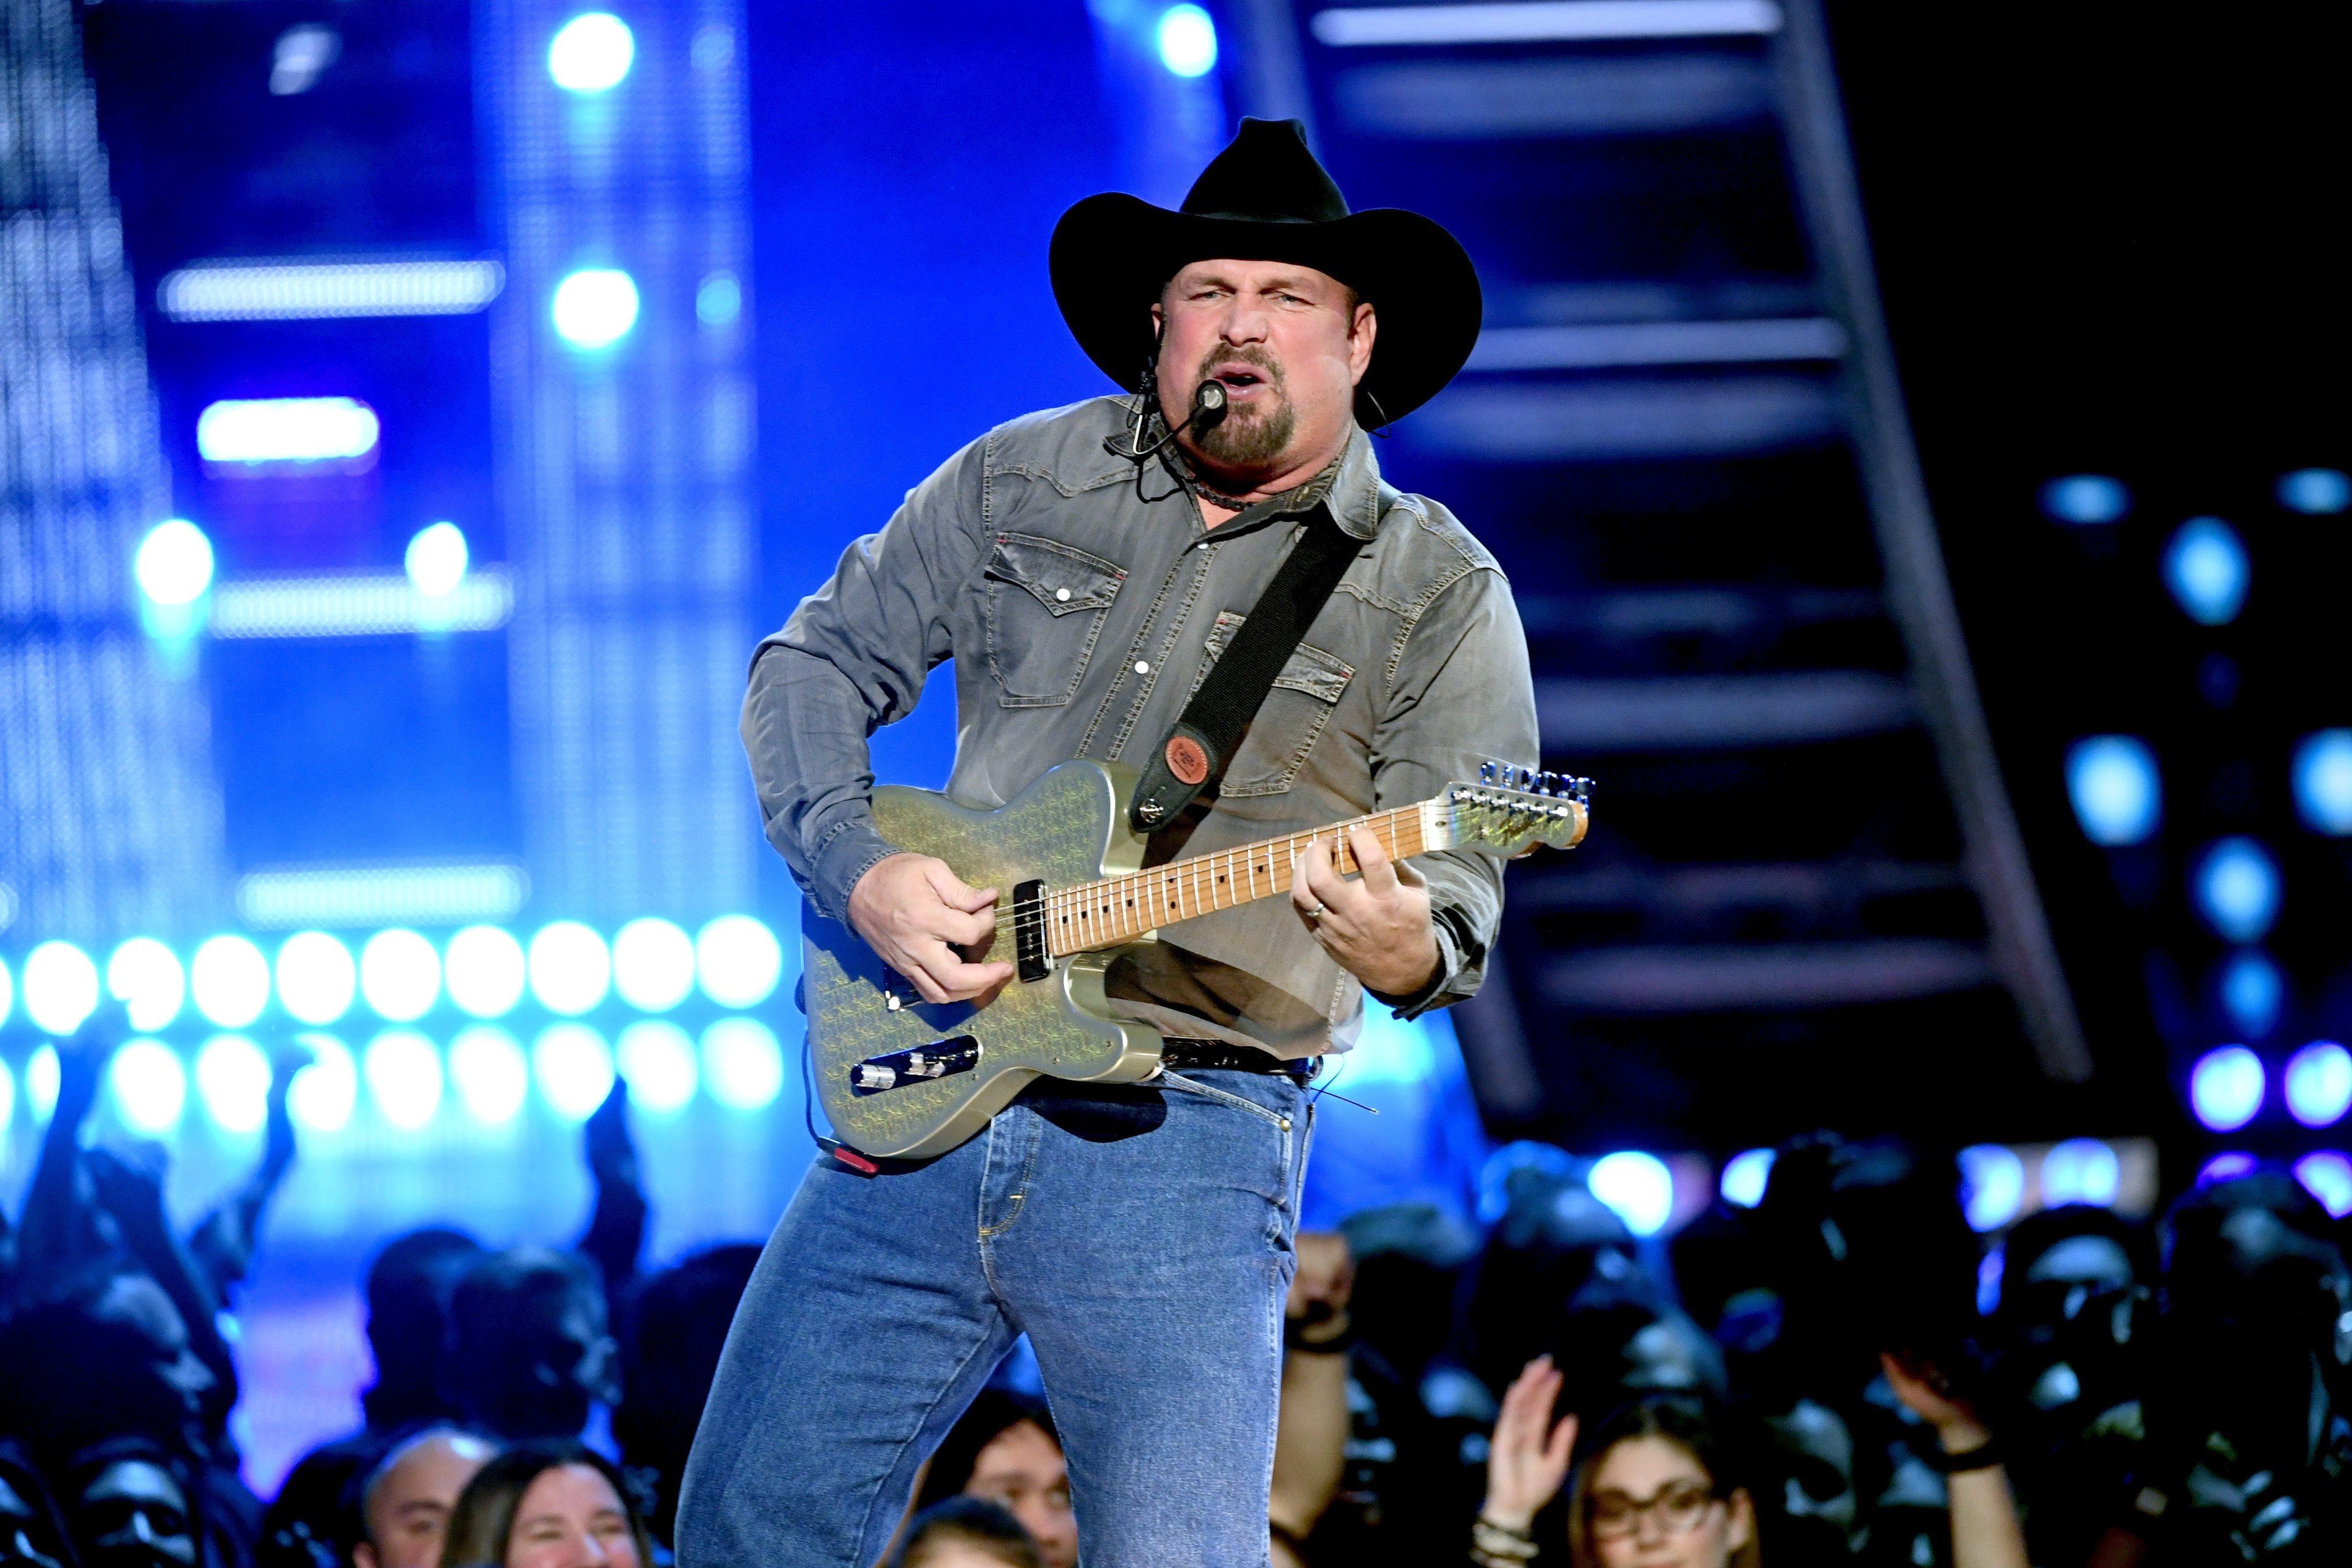 Garth Brooks performs at the iHeartRadio Music Awards in Los Angeles, California on March 14, 2019 | Photo: Getty Images